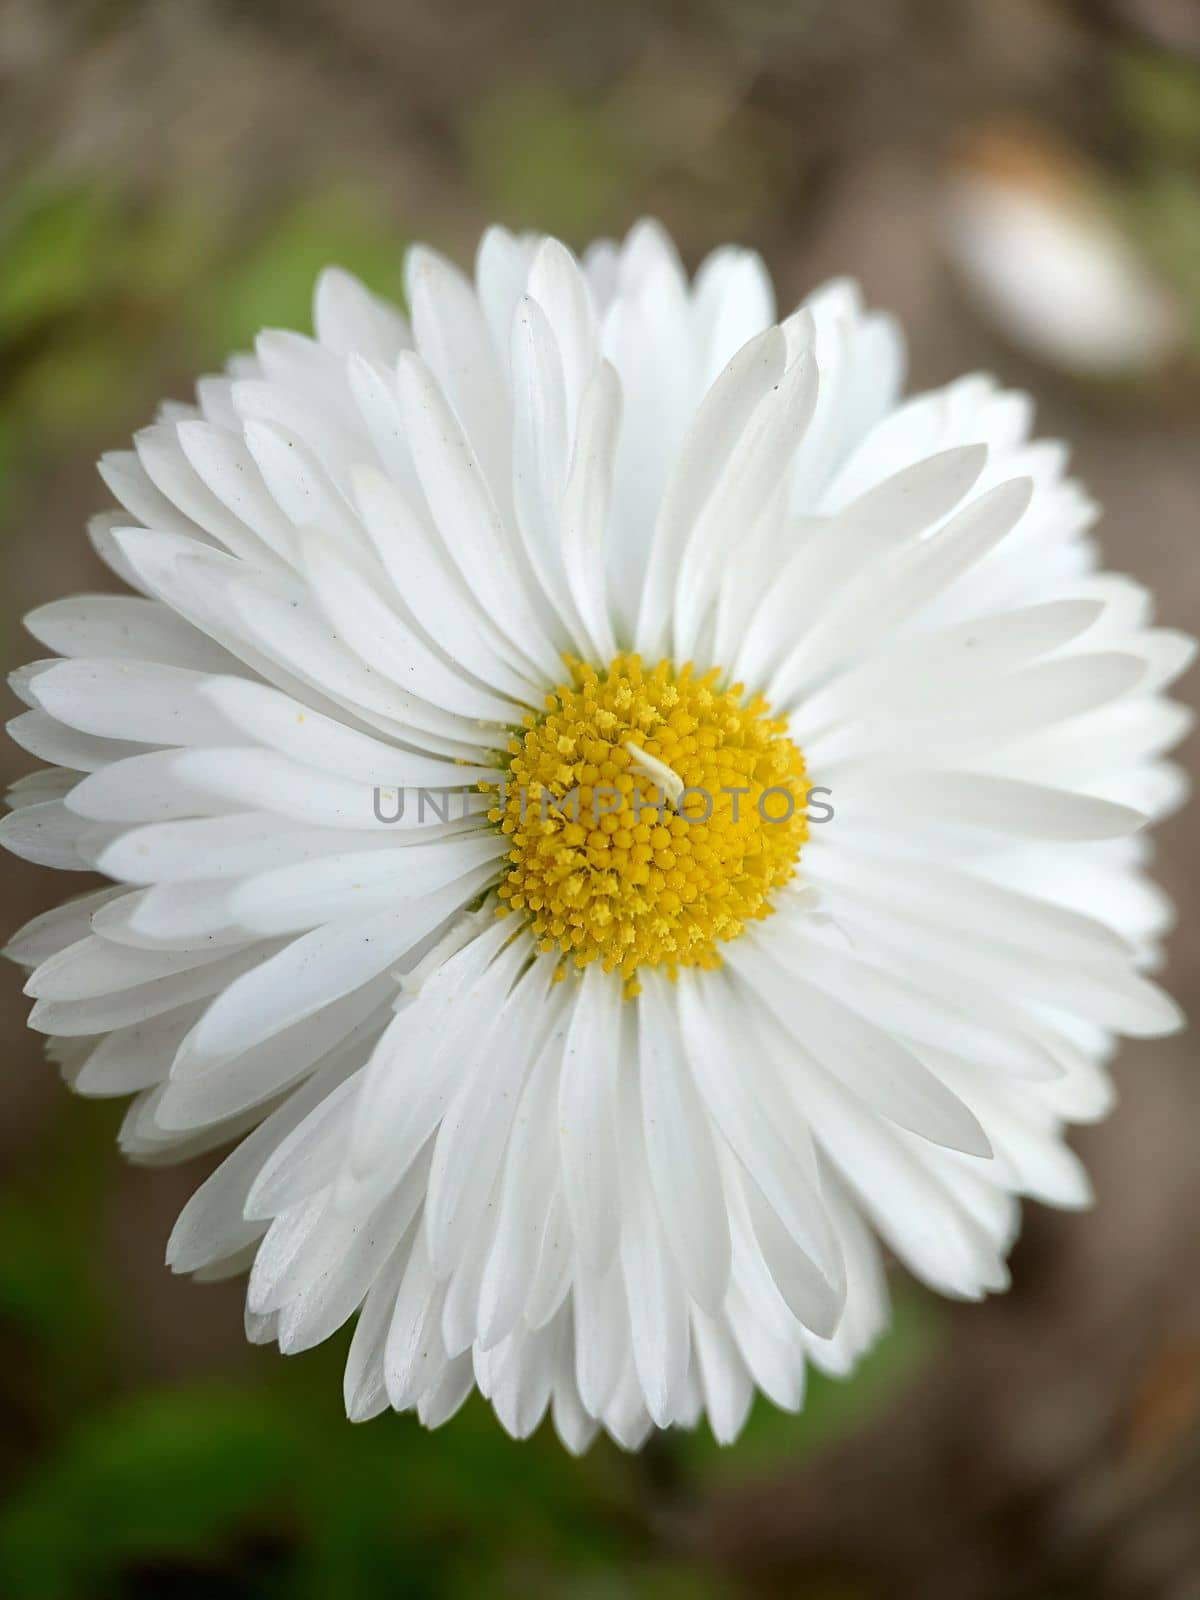 Background texture of a white daisy close-up outdoors.Macrophotography.Texture or background.